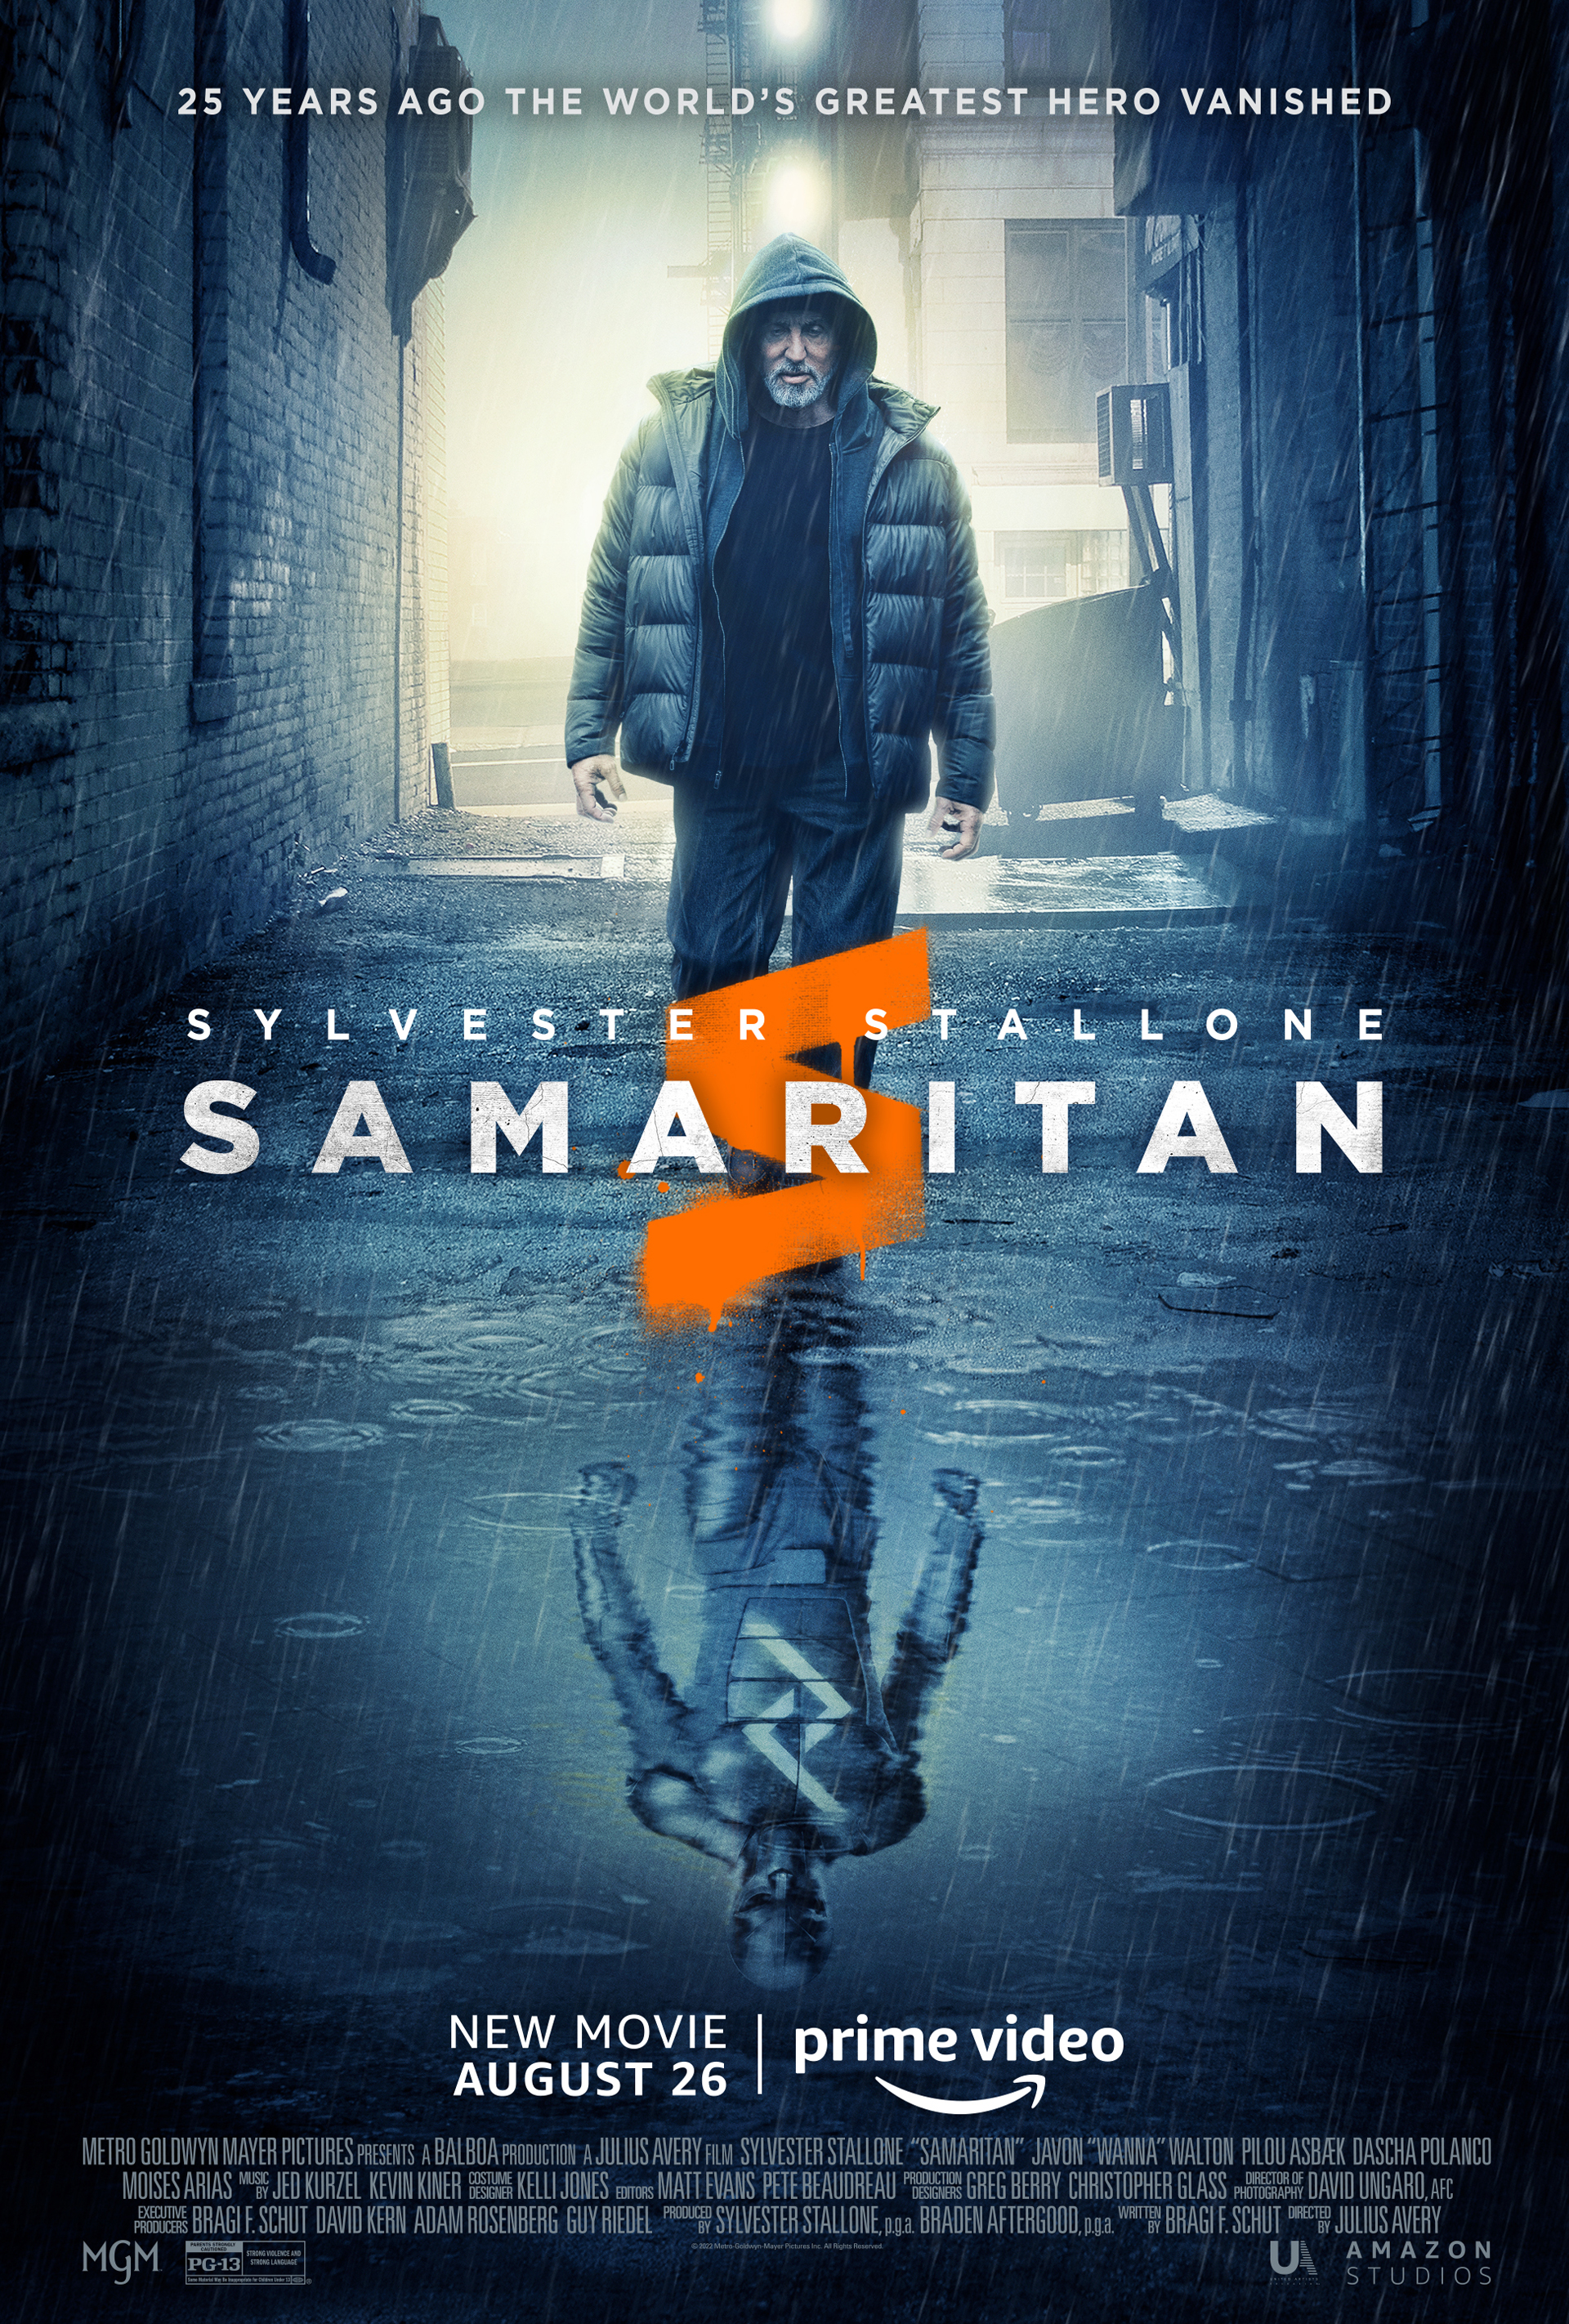 The official poster for Prime Video superhero movie Samaritan, which stars legendary actor Sylvester Stallone